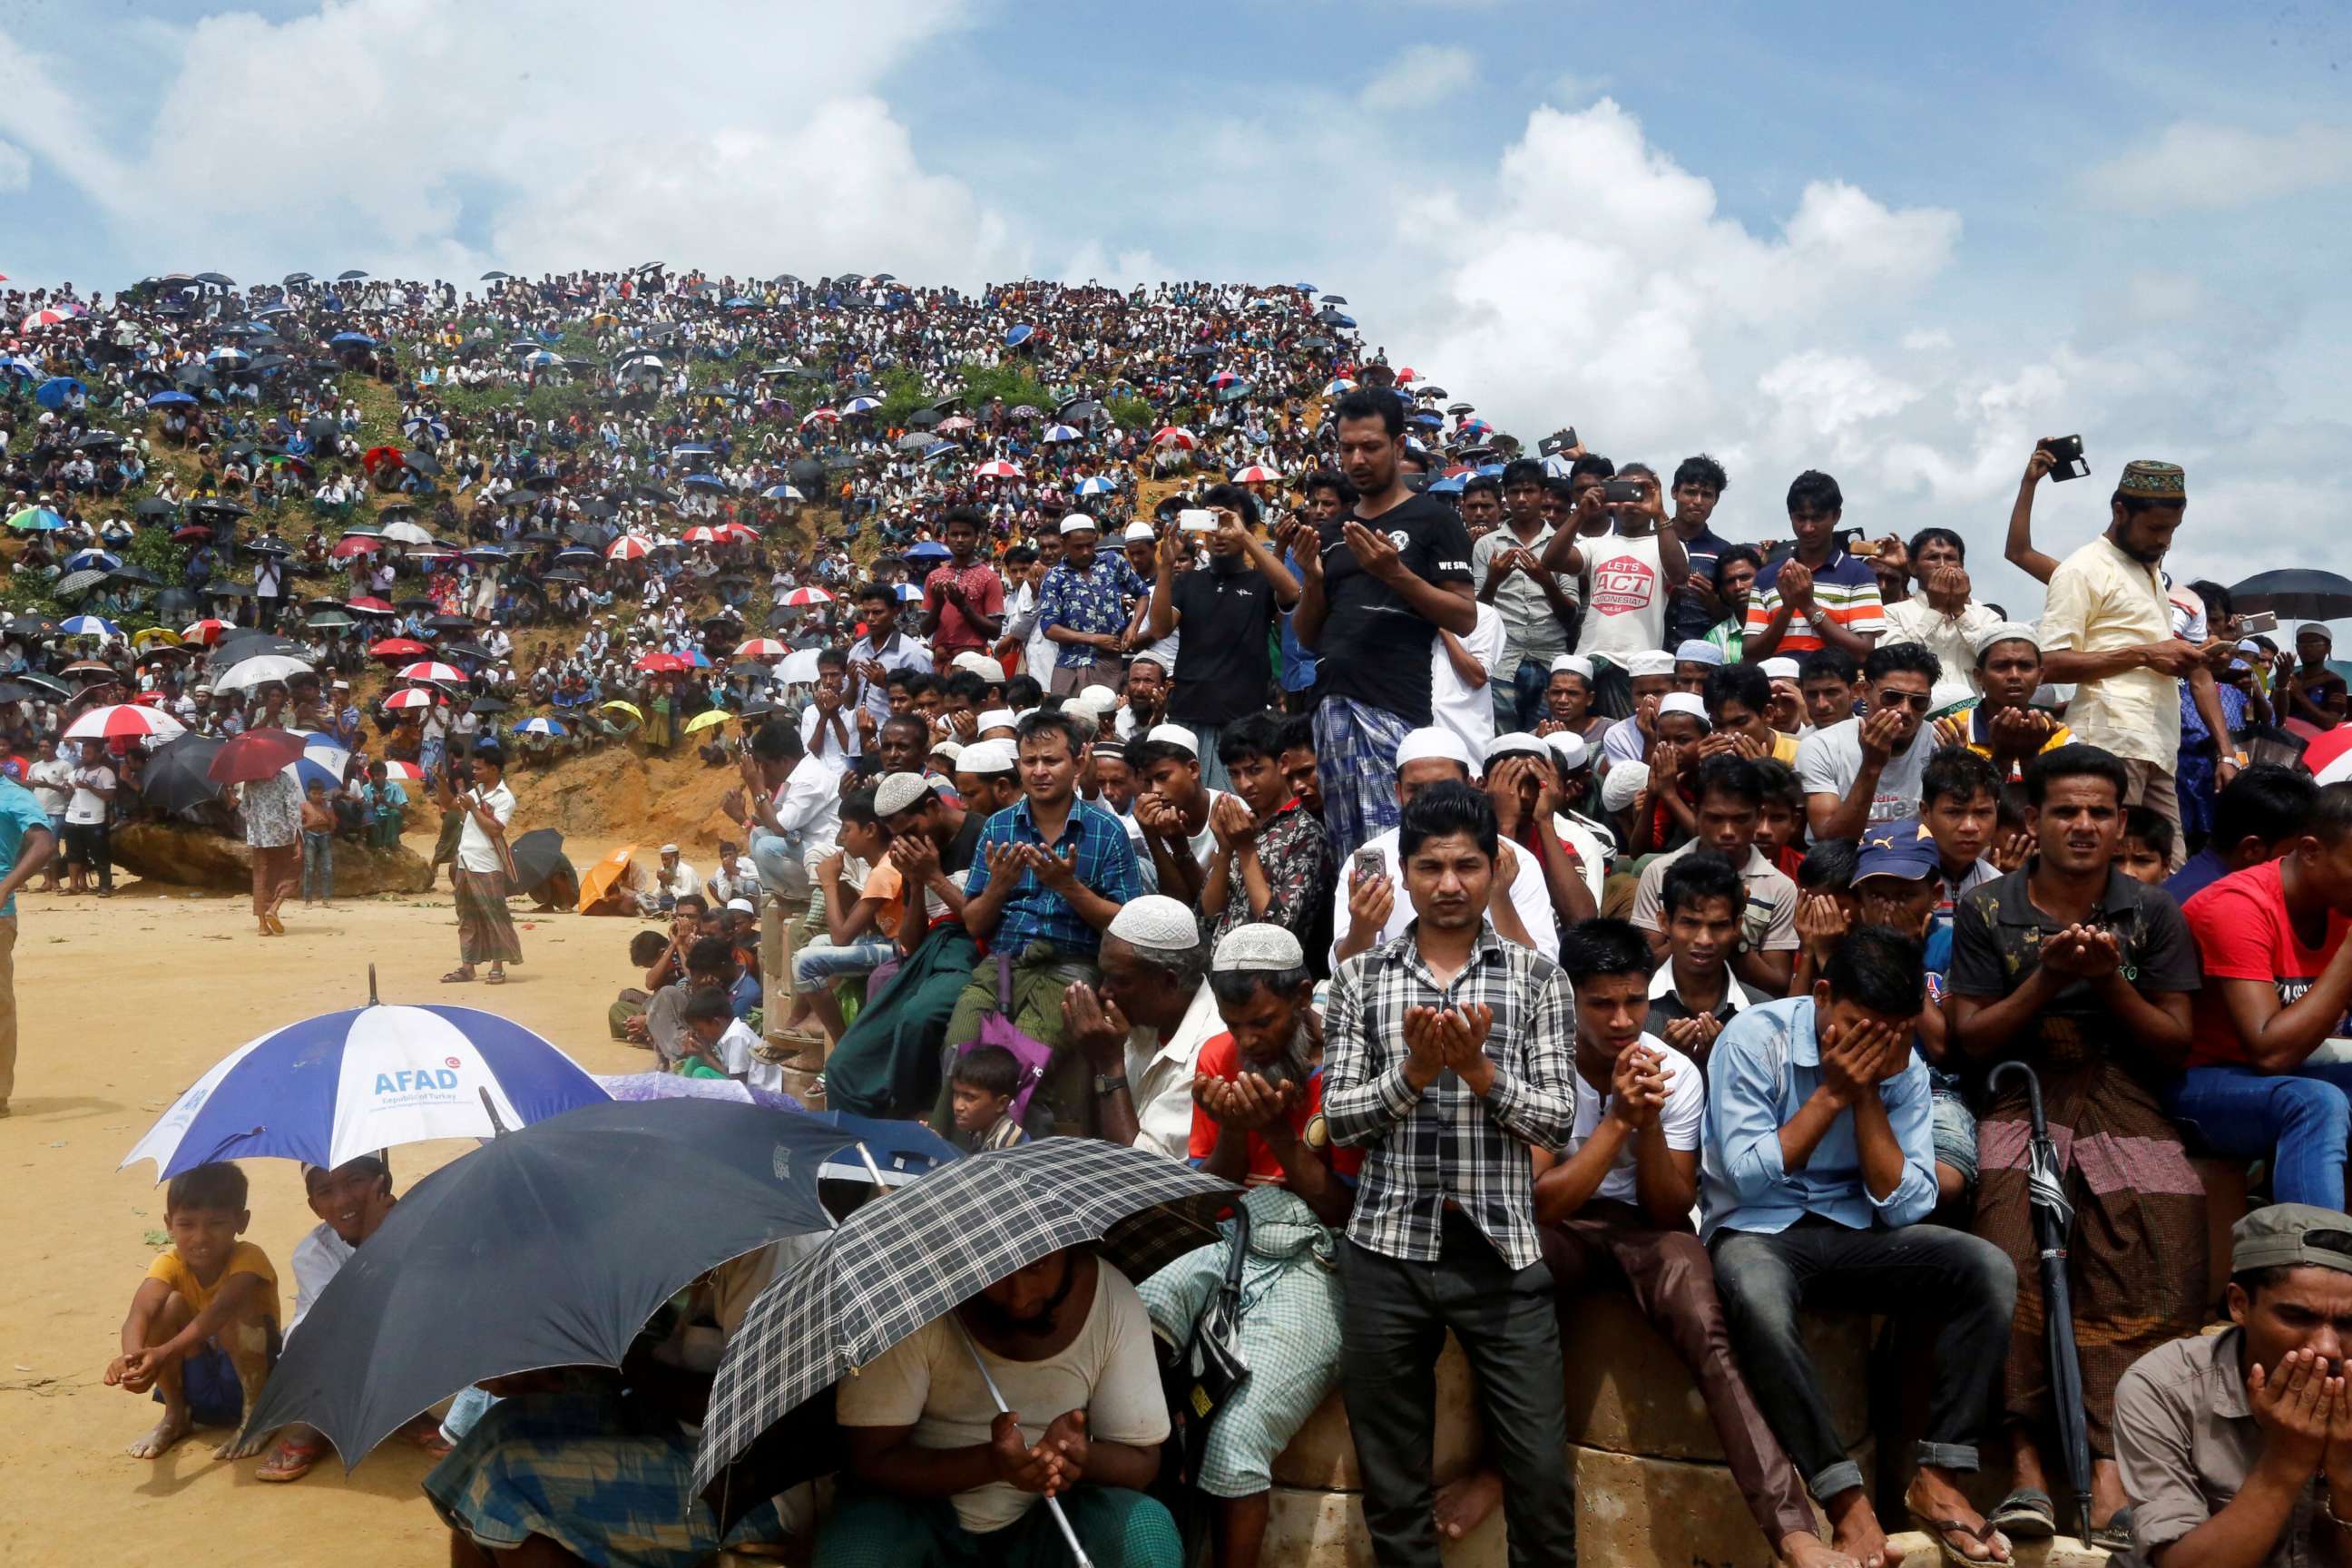 FILE PHOTO: Rohingya refugees take part in a prayer as they gather to mark the second anniversary of the exodus at the Kutupalong camp in Coxâs Bazar, Bangladesh, August 25, 2019. REUTERS/Rafiqur Rahman/File Photo